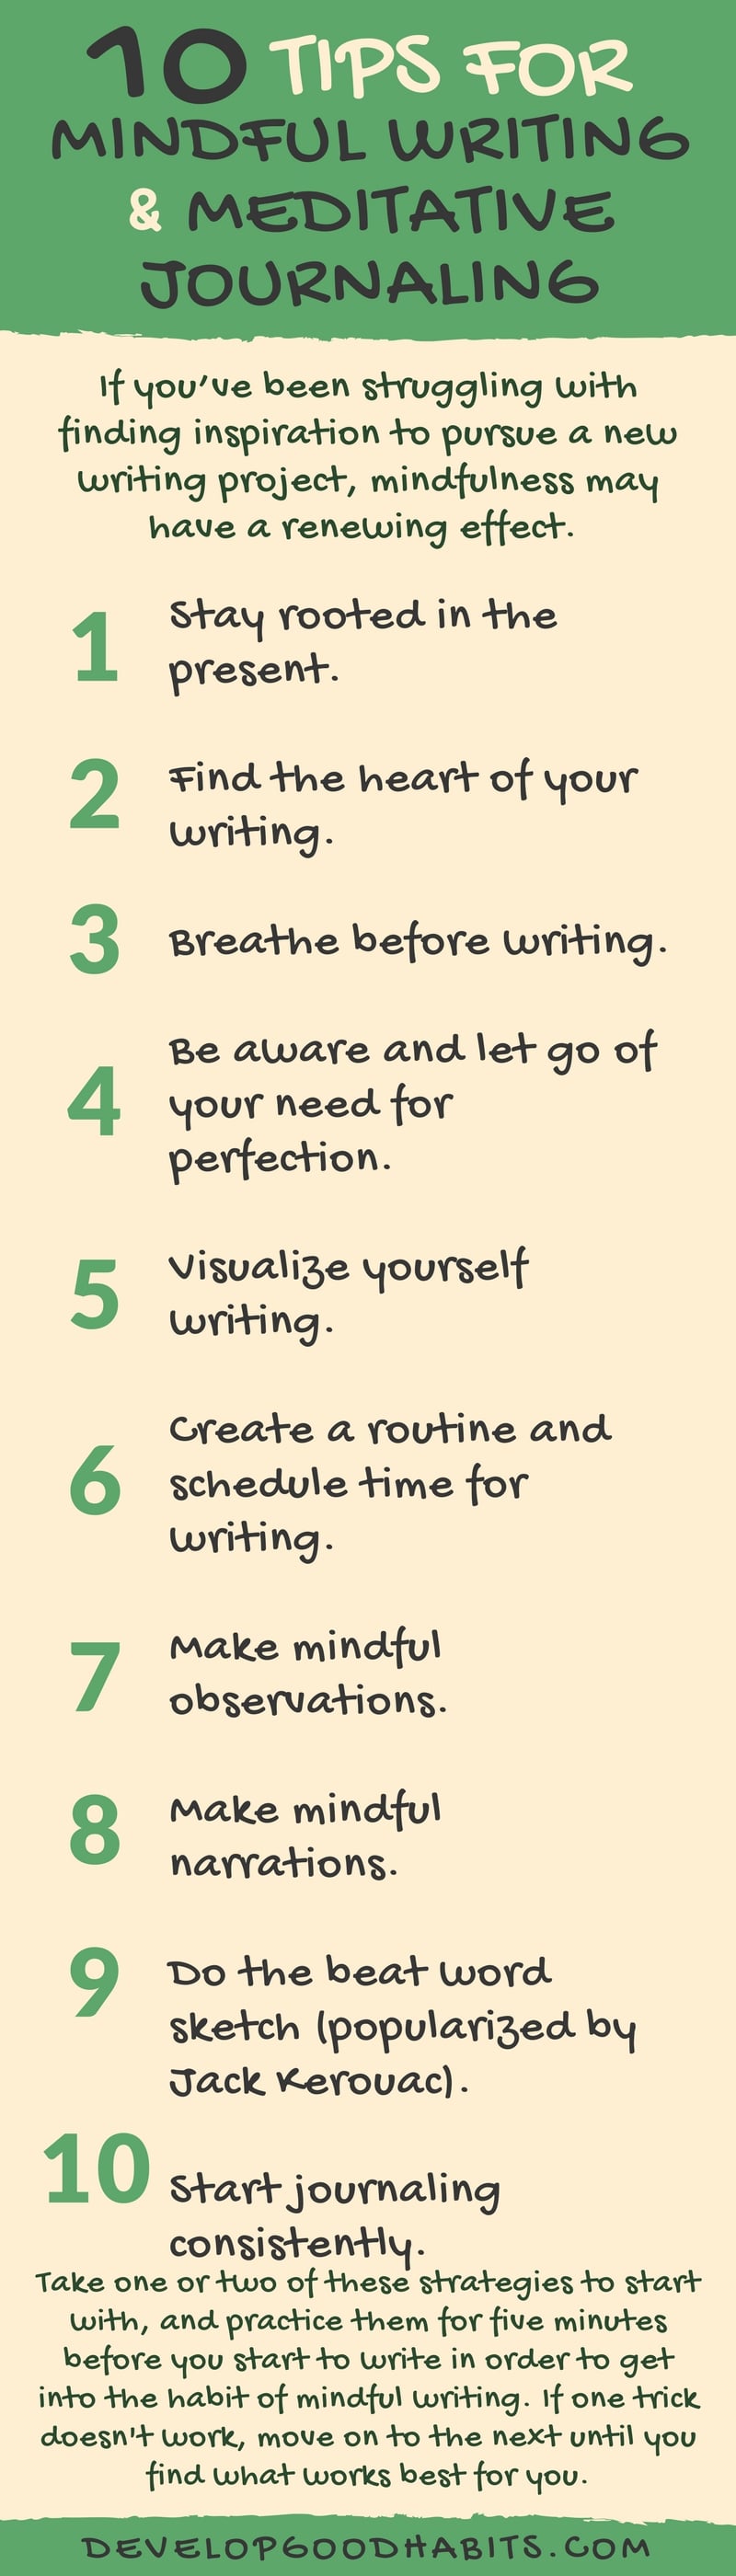 Tips for Mindful Writing